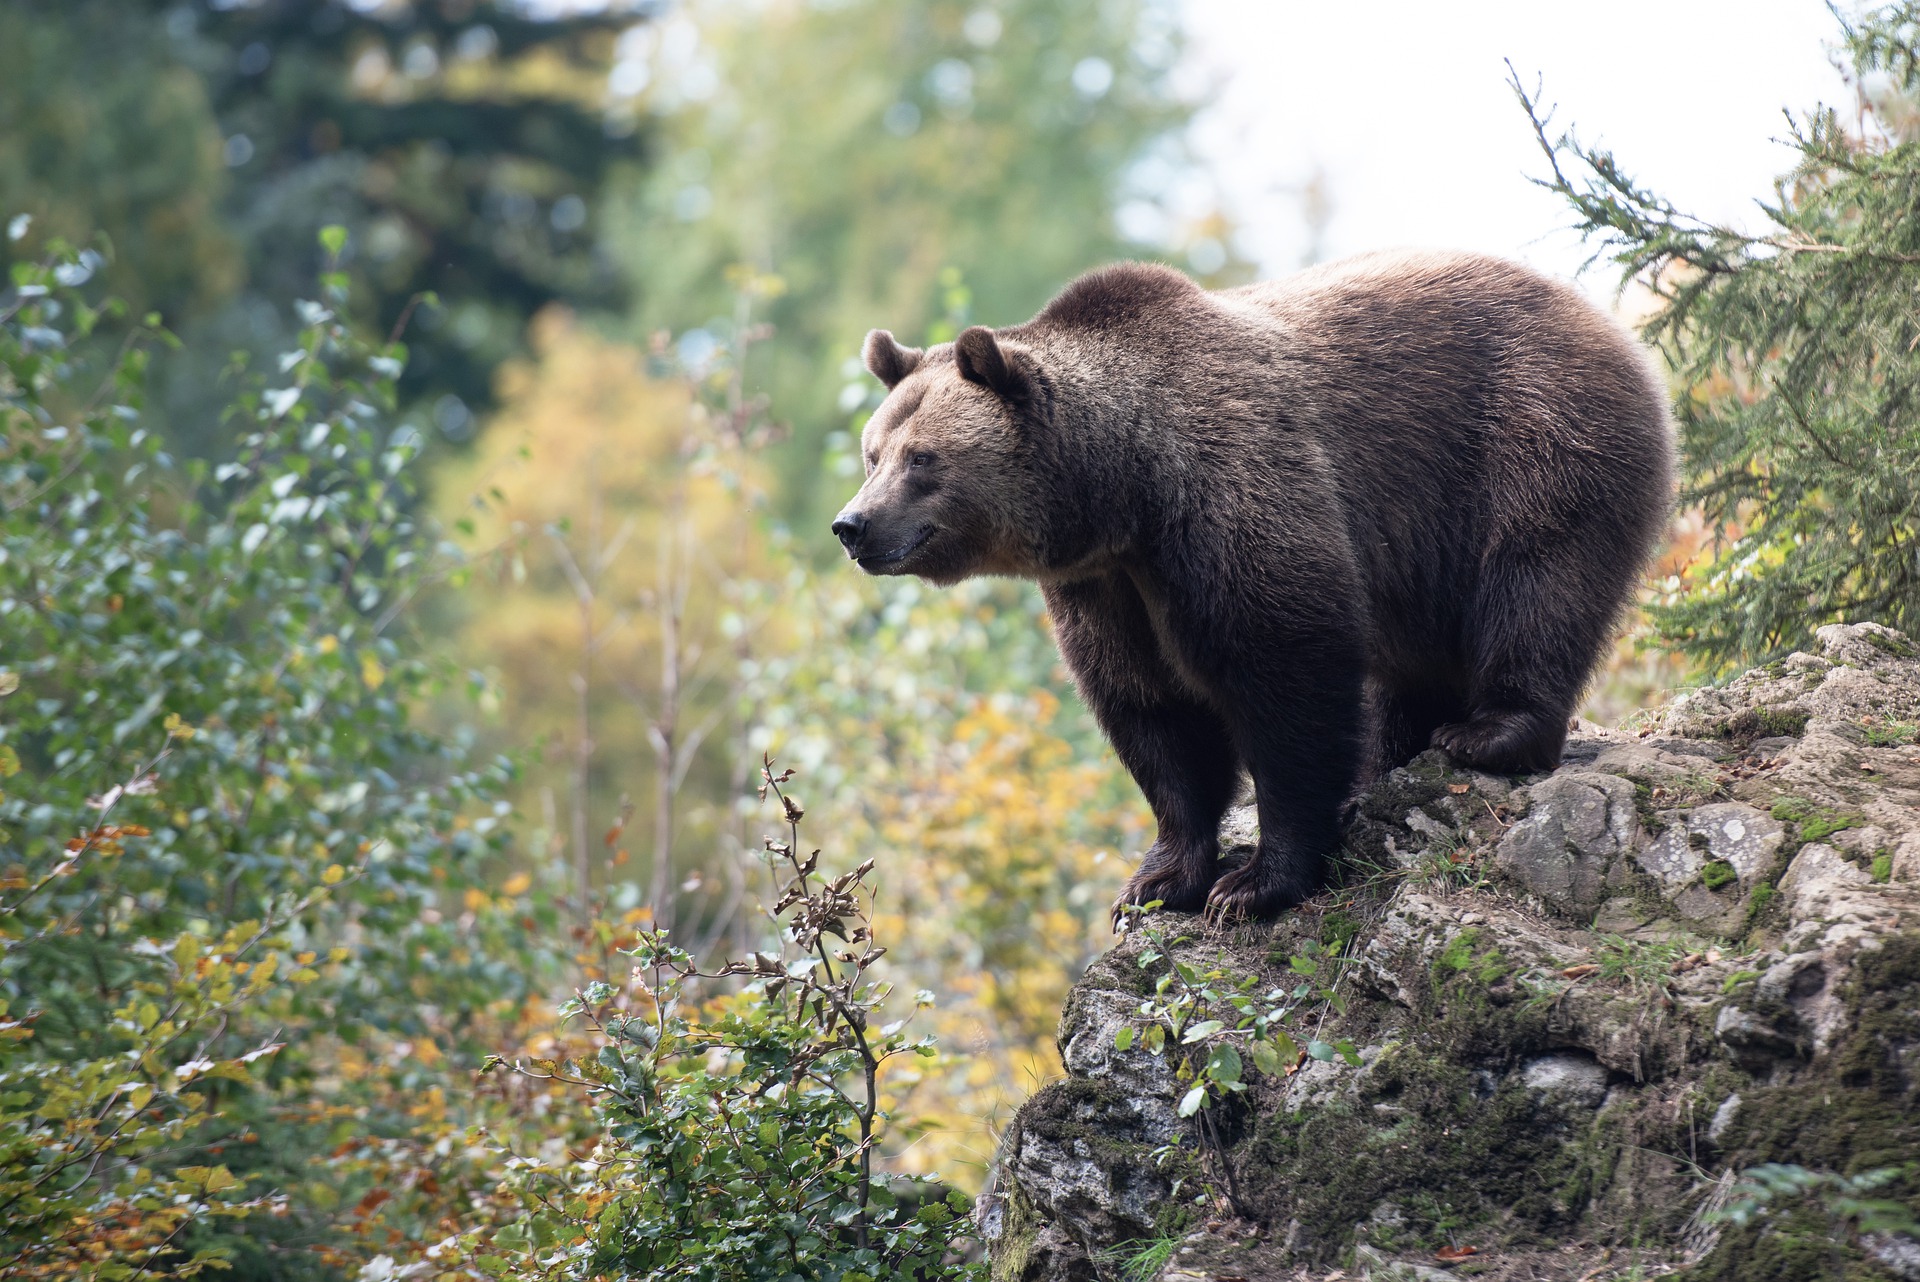 Romania Adopts Draft Law on Bear-Quotas Initiated by Hungarian Party